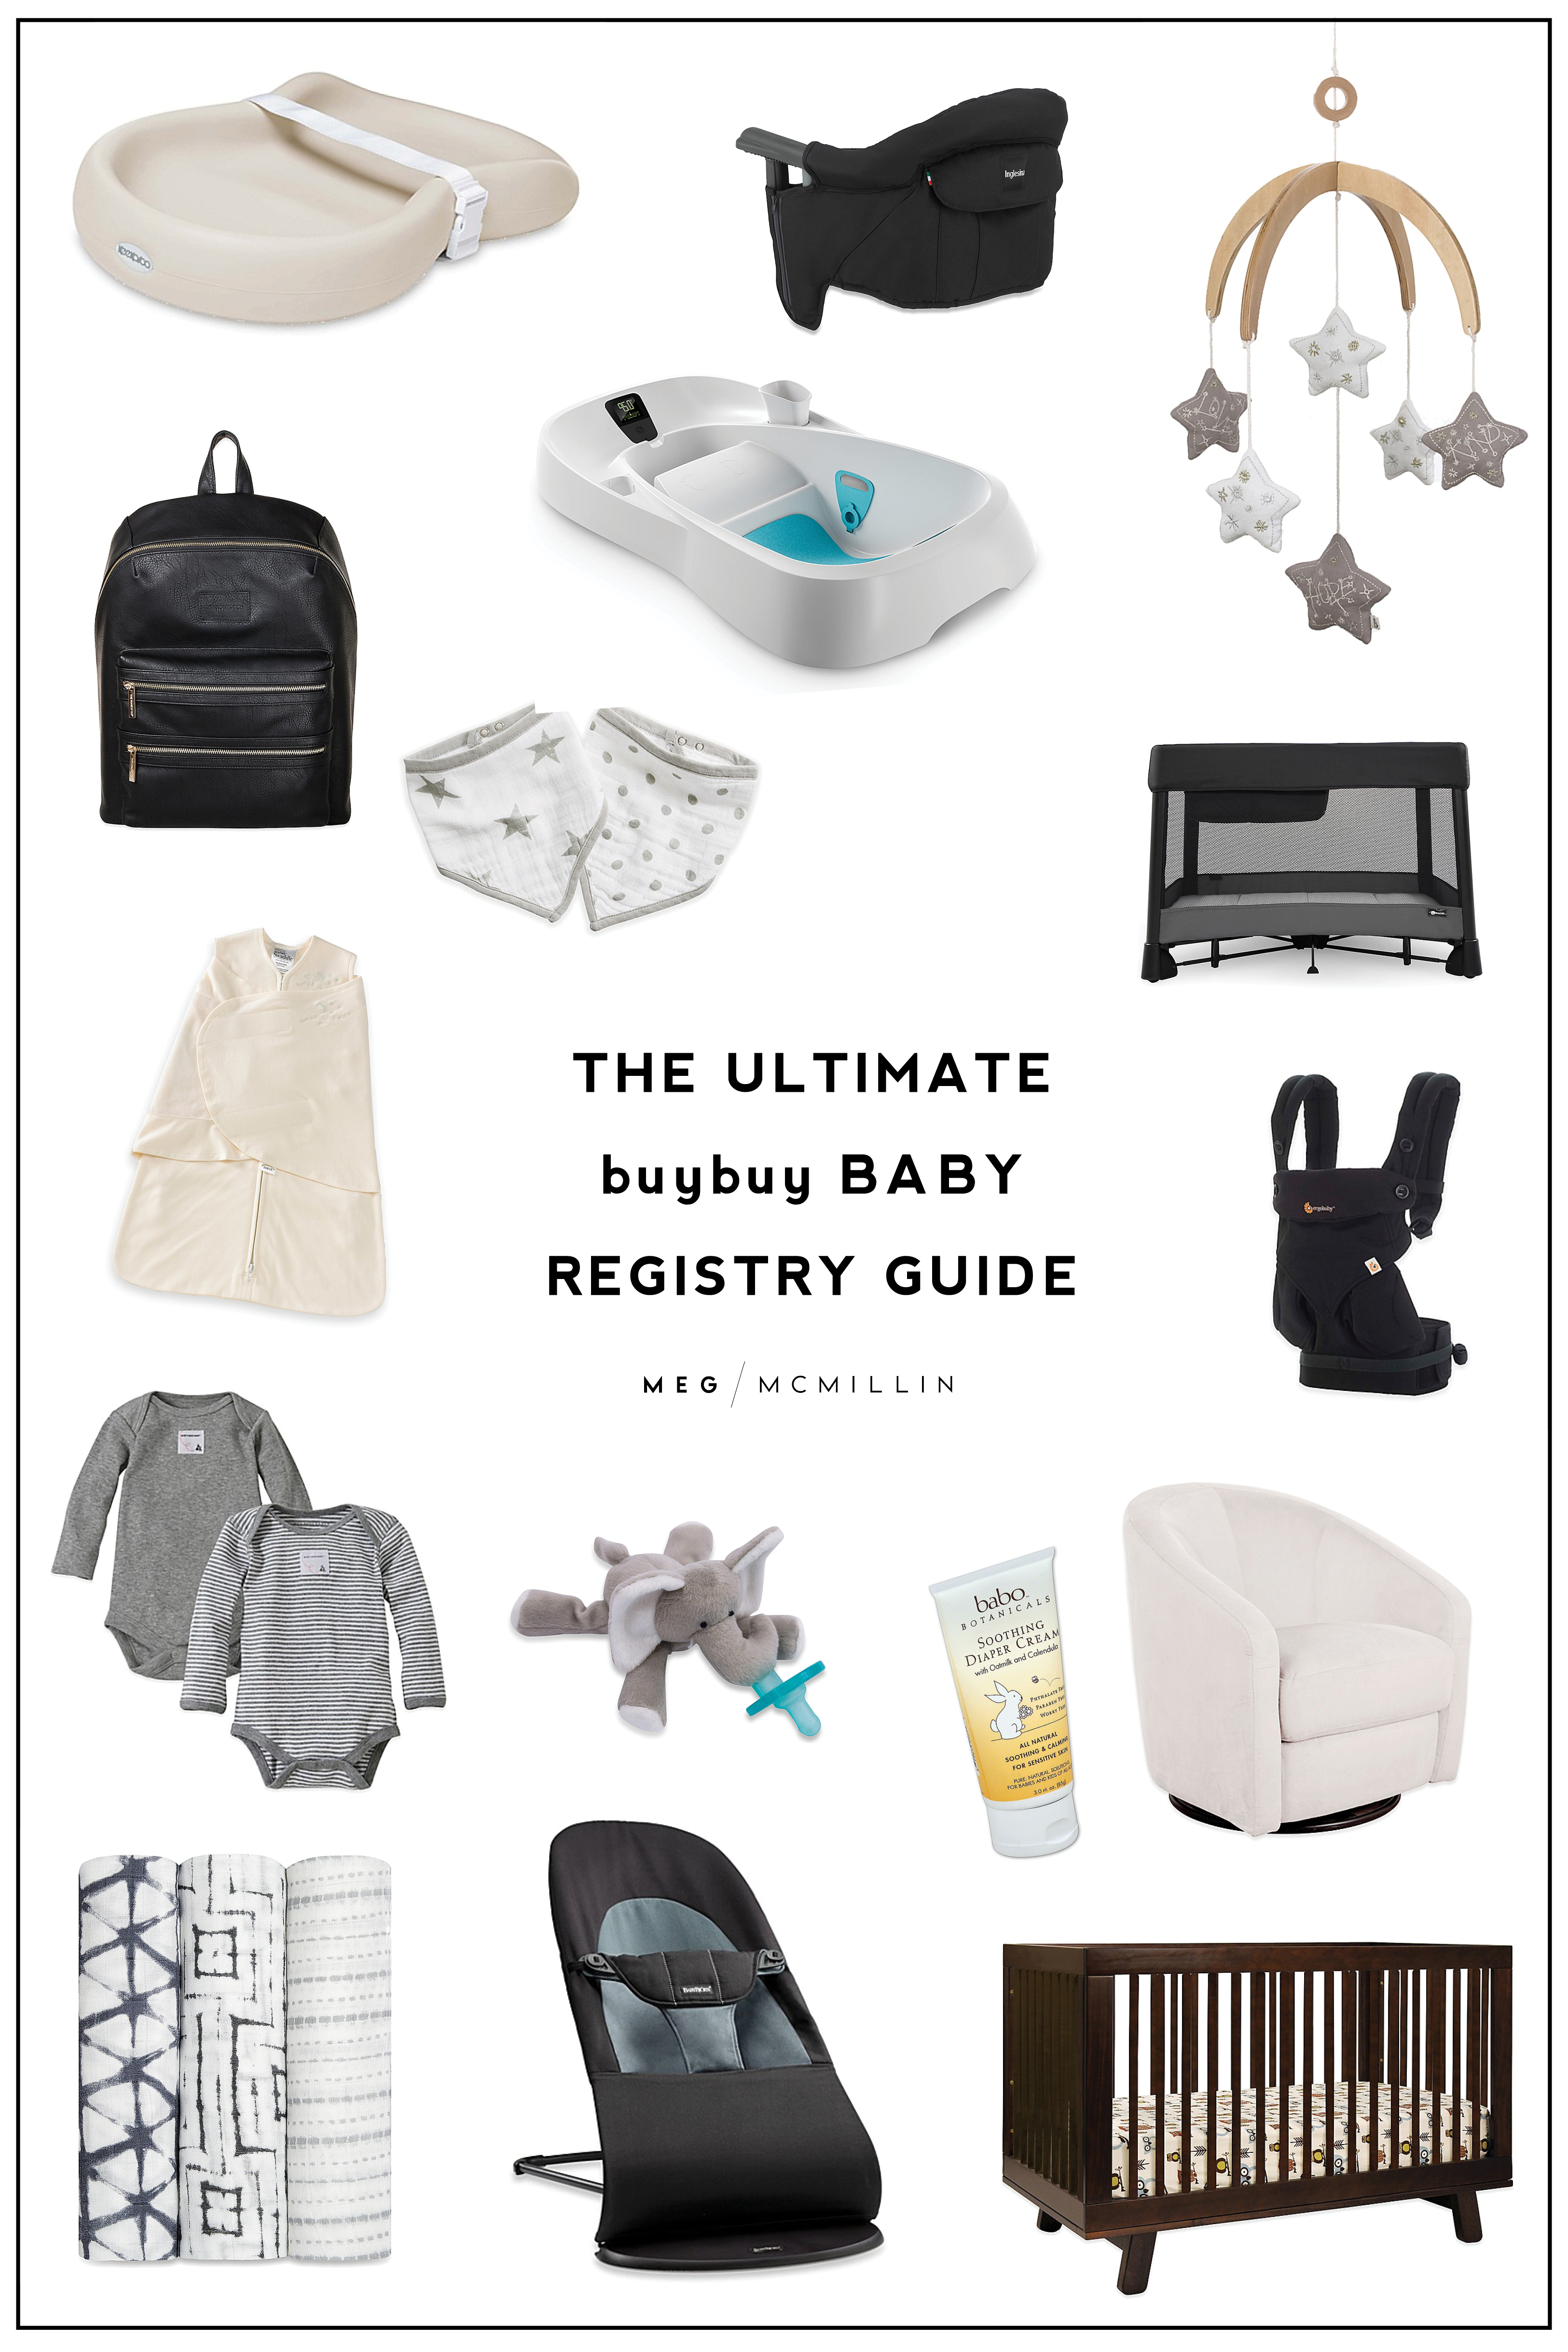 The Ultimate Buybuy Baby Registry Guide Meg Mcmillin